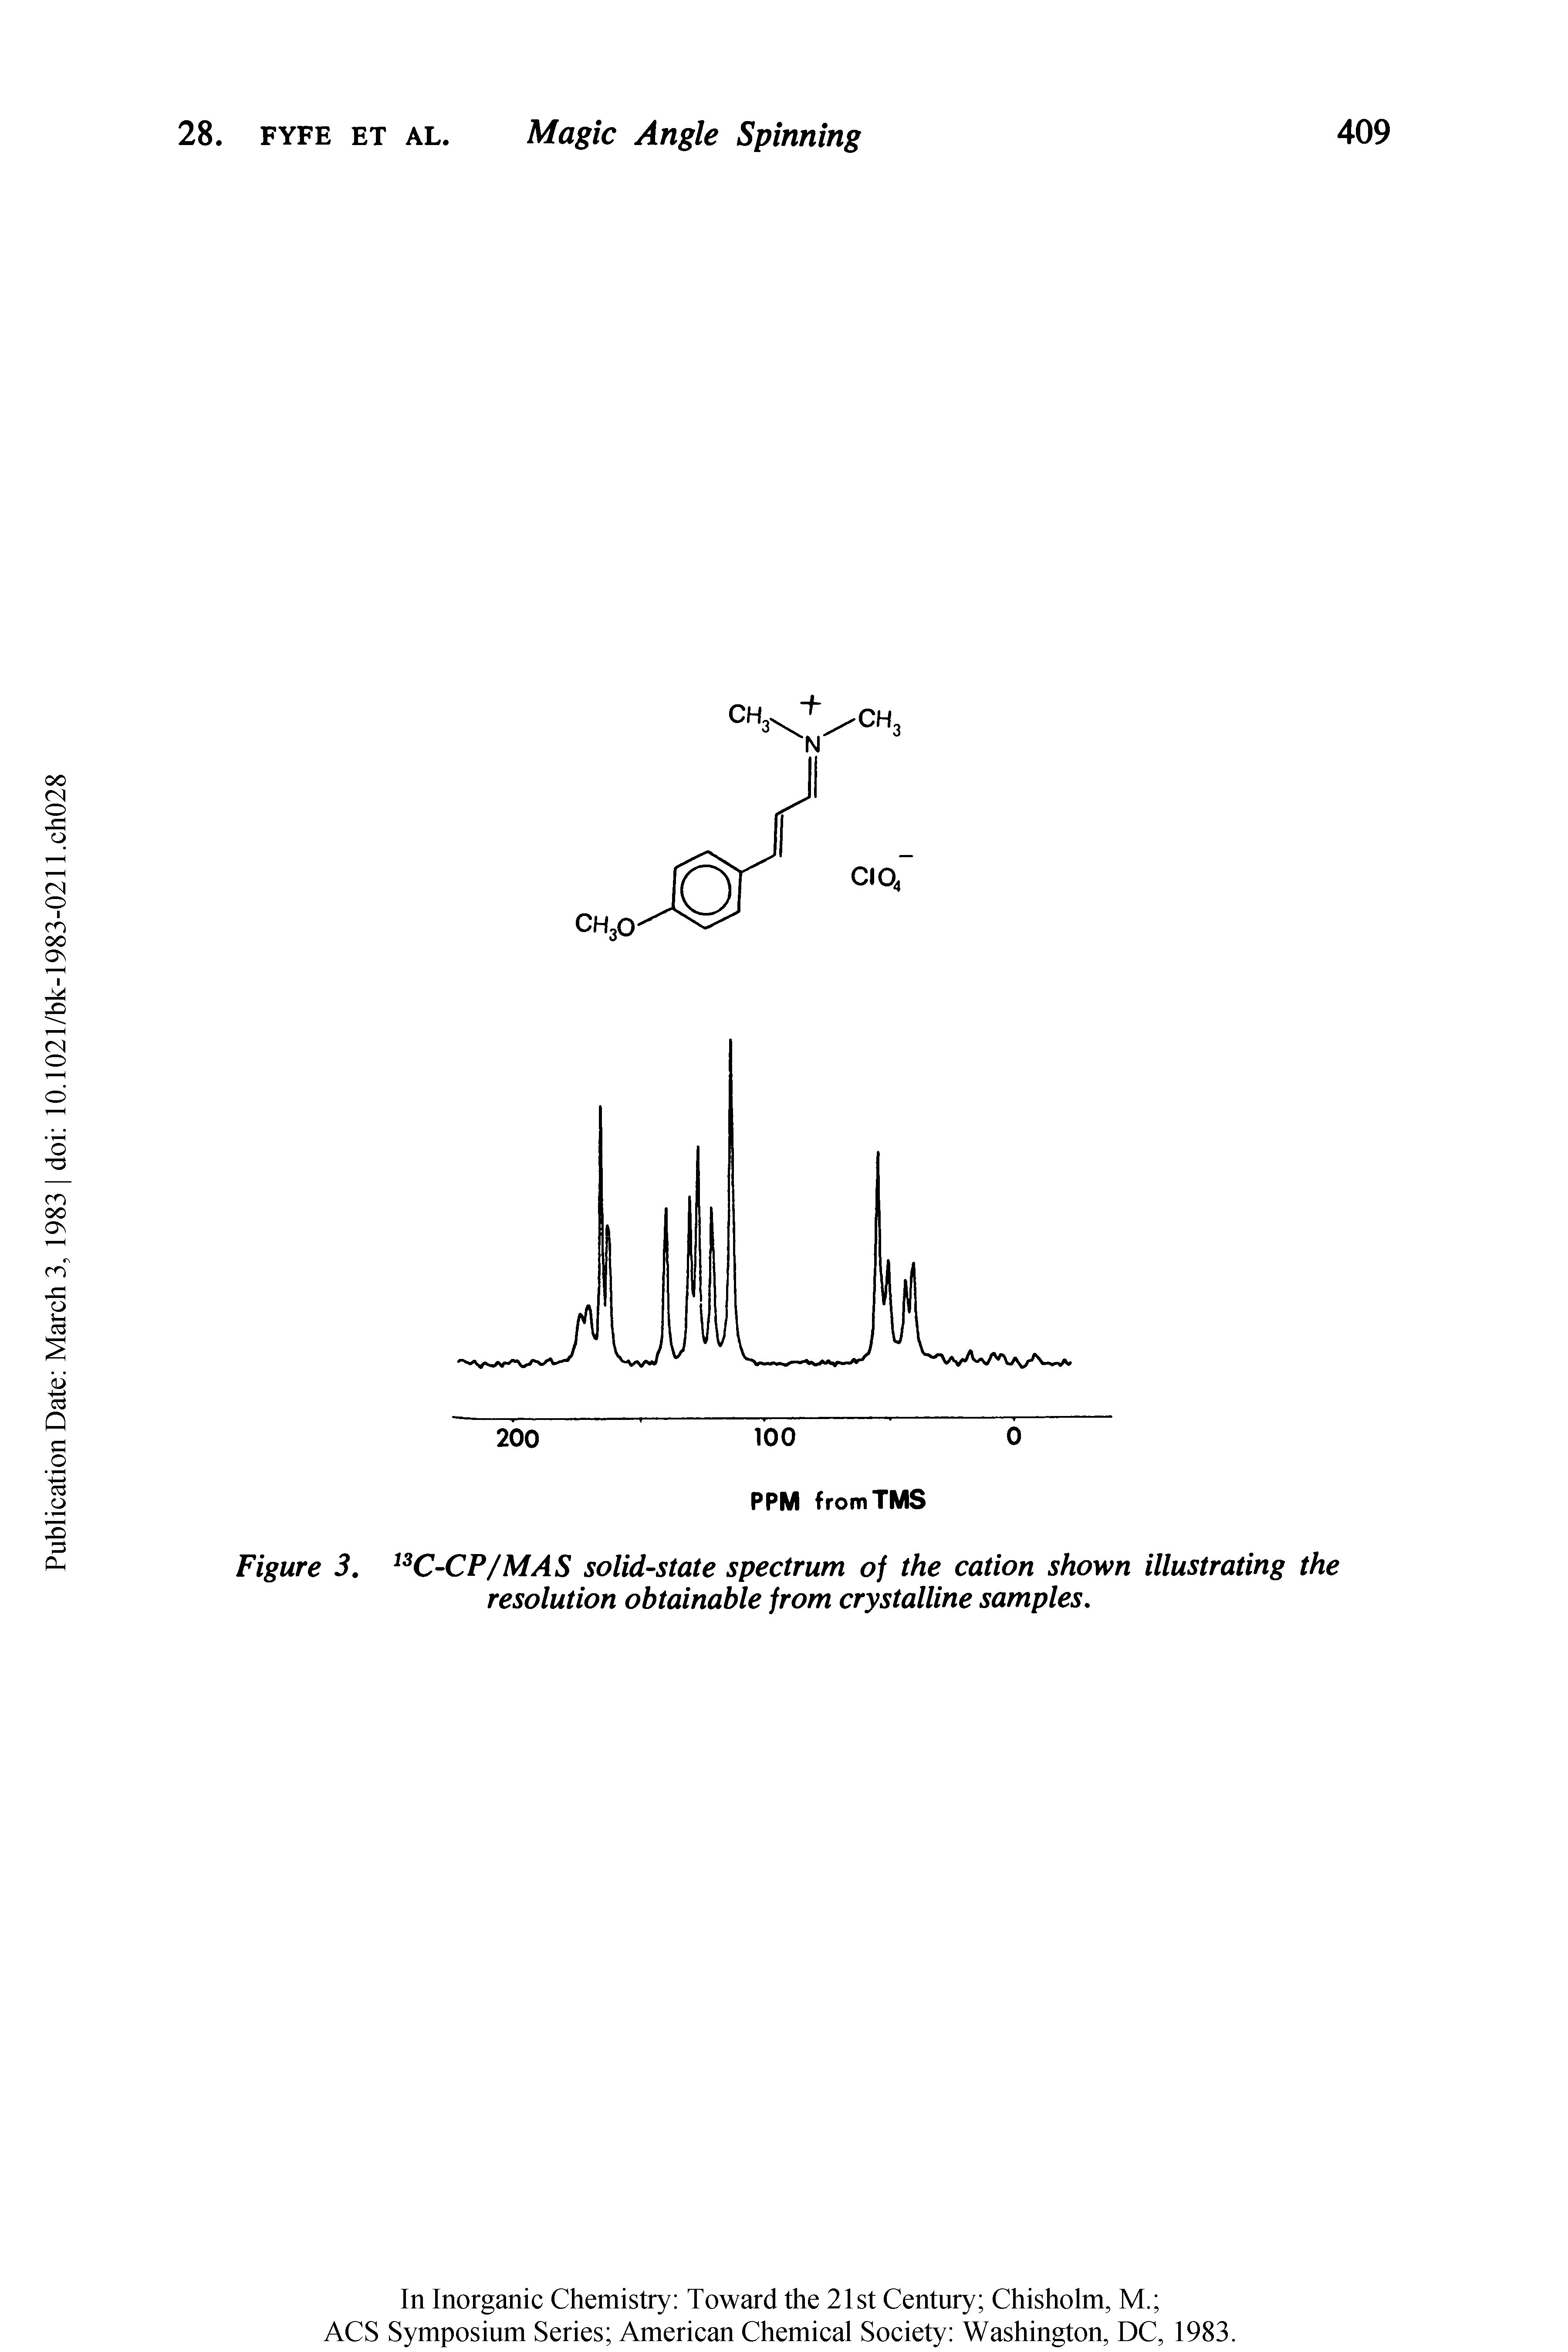 Figure 3. 13C-CP/MAS solid-state spectrum of the cation shown illustrating the resolution obtainable from crystalline samples.